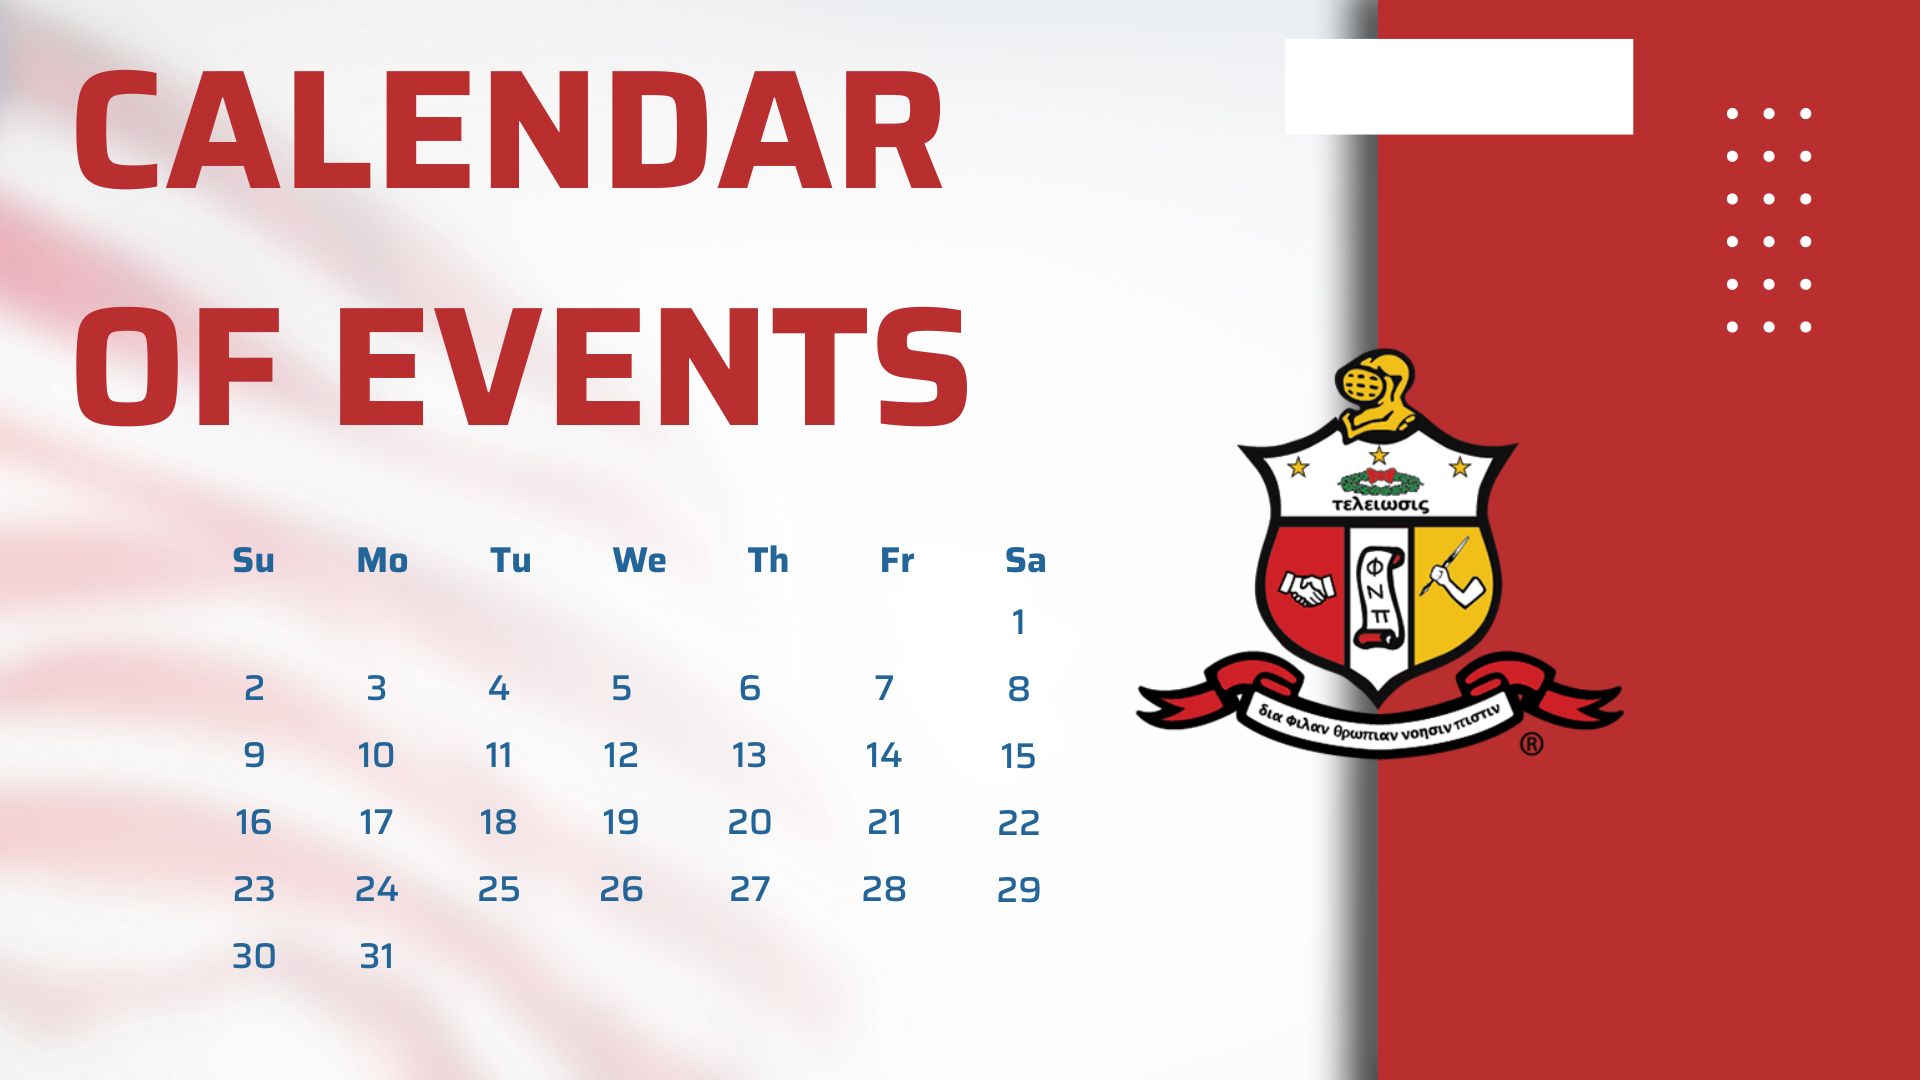 CALENDAR OF EVENTS GRAPHIC